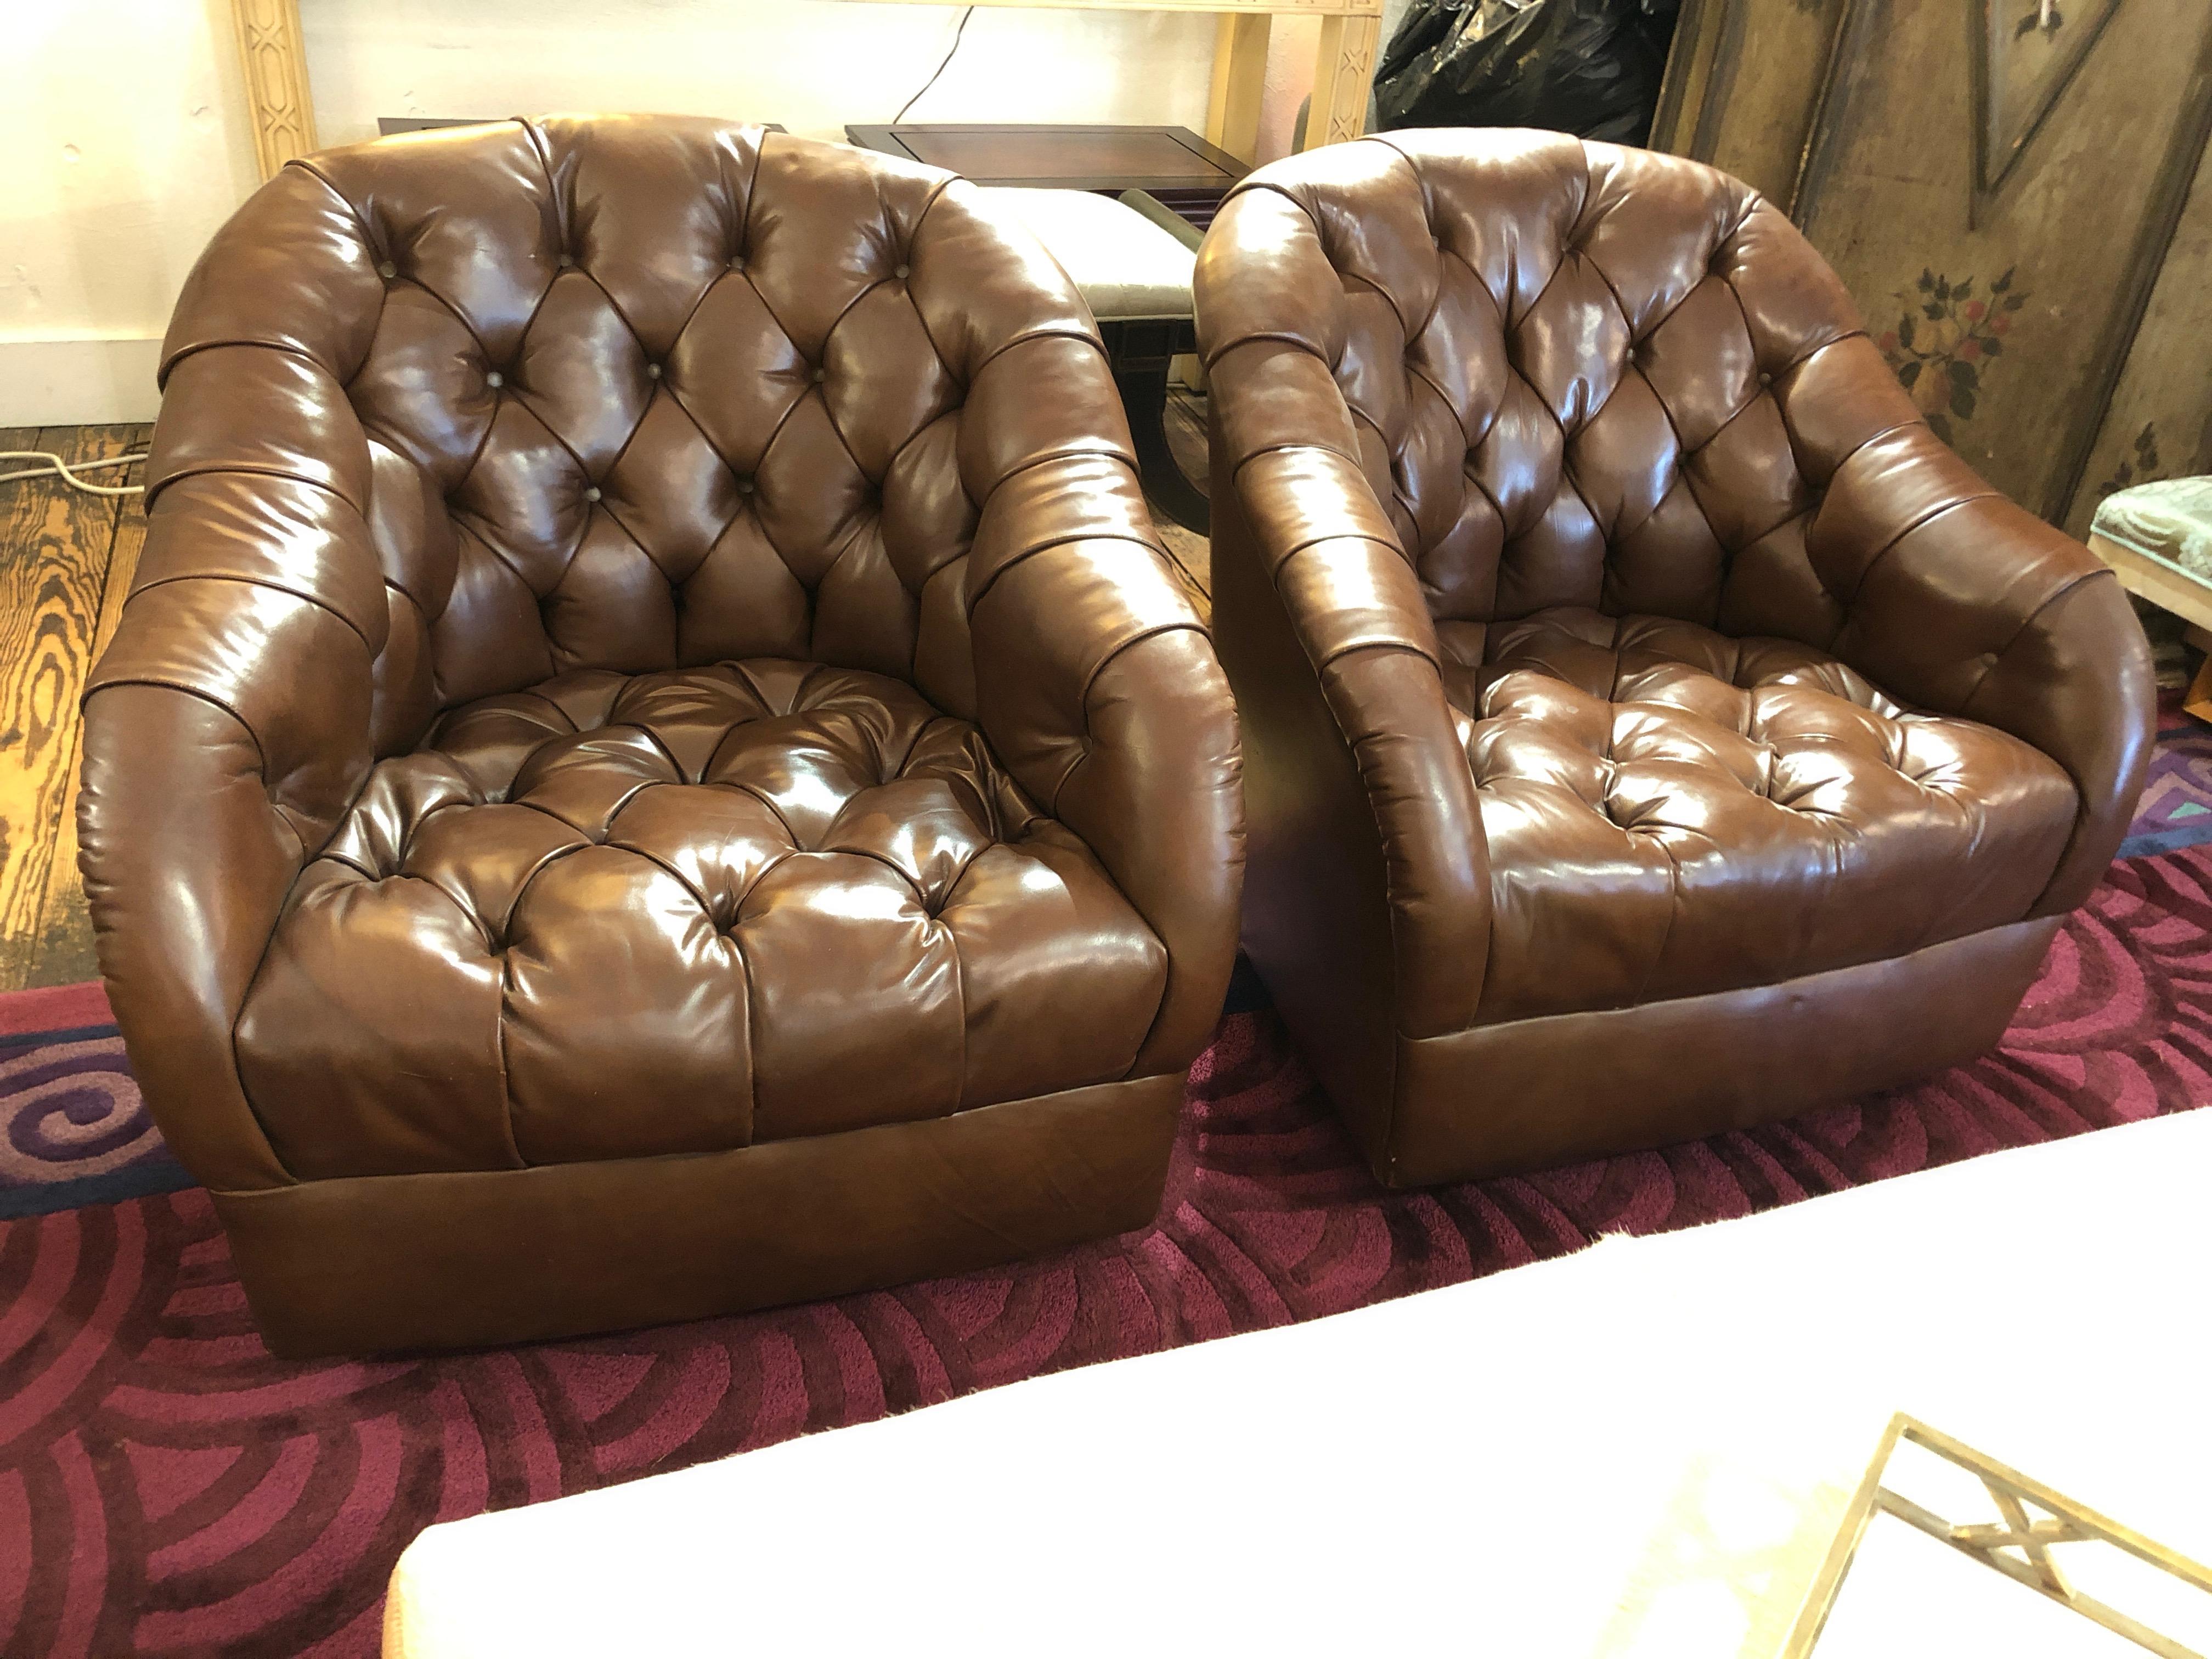 Two to die for elegant barrel back swivel lounge chairs with deep button tufting and original handstitched milk chocolate brown leather upholstery. Even the swivel underneath is leather clad. By Ward Bennett, label underneath.
Measures: Seat height